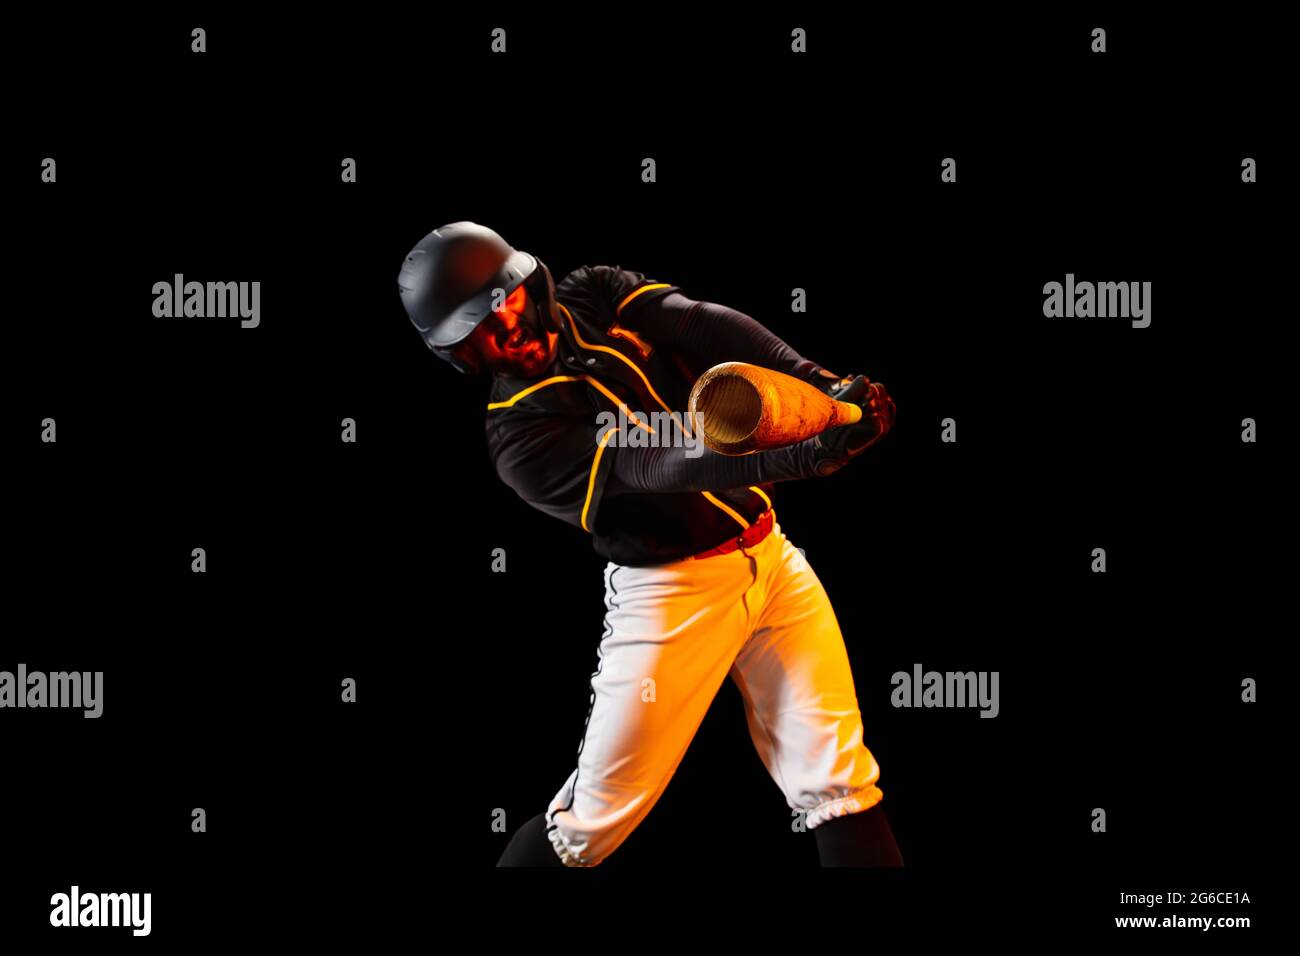 American baseball player, pitcher in sports uniform and equipment playing baseball isolated on black studio background in neon light. Rear view Stock Photo